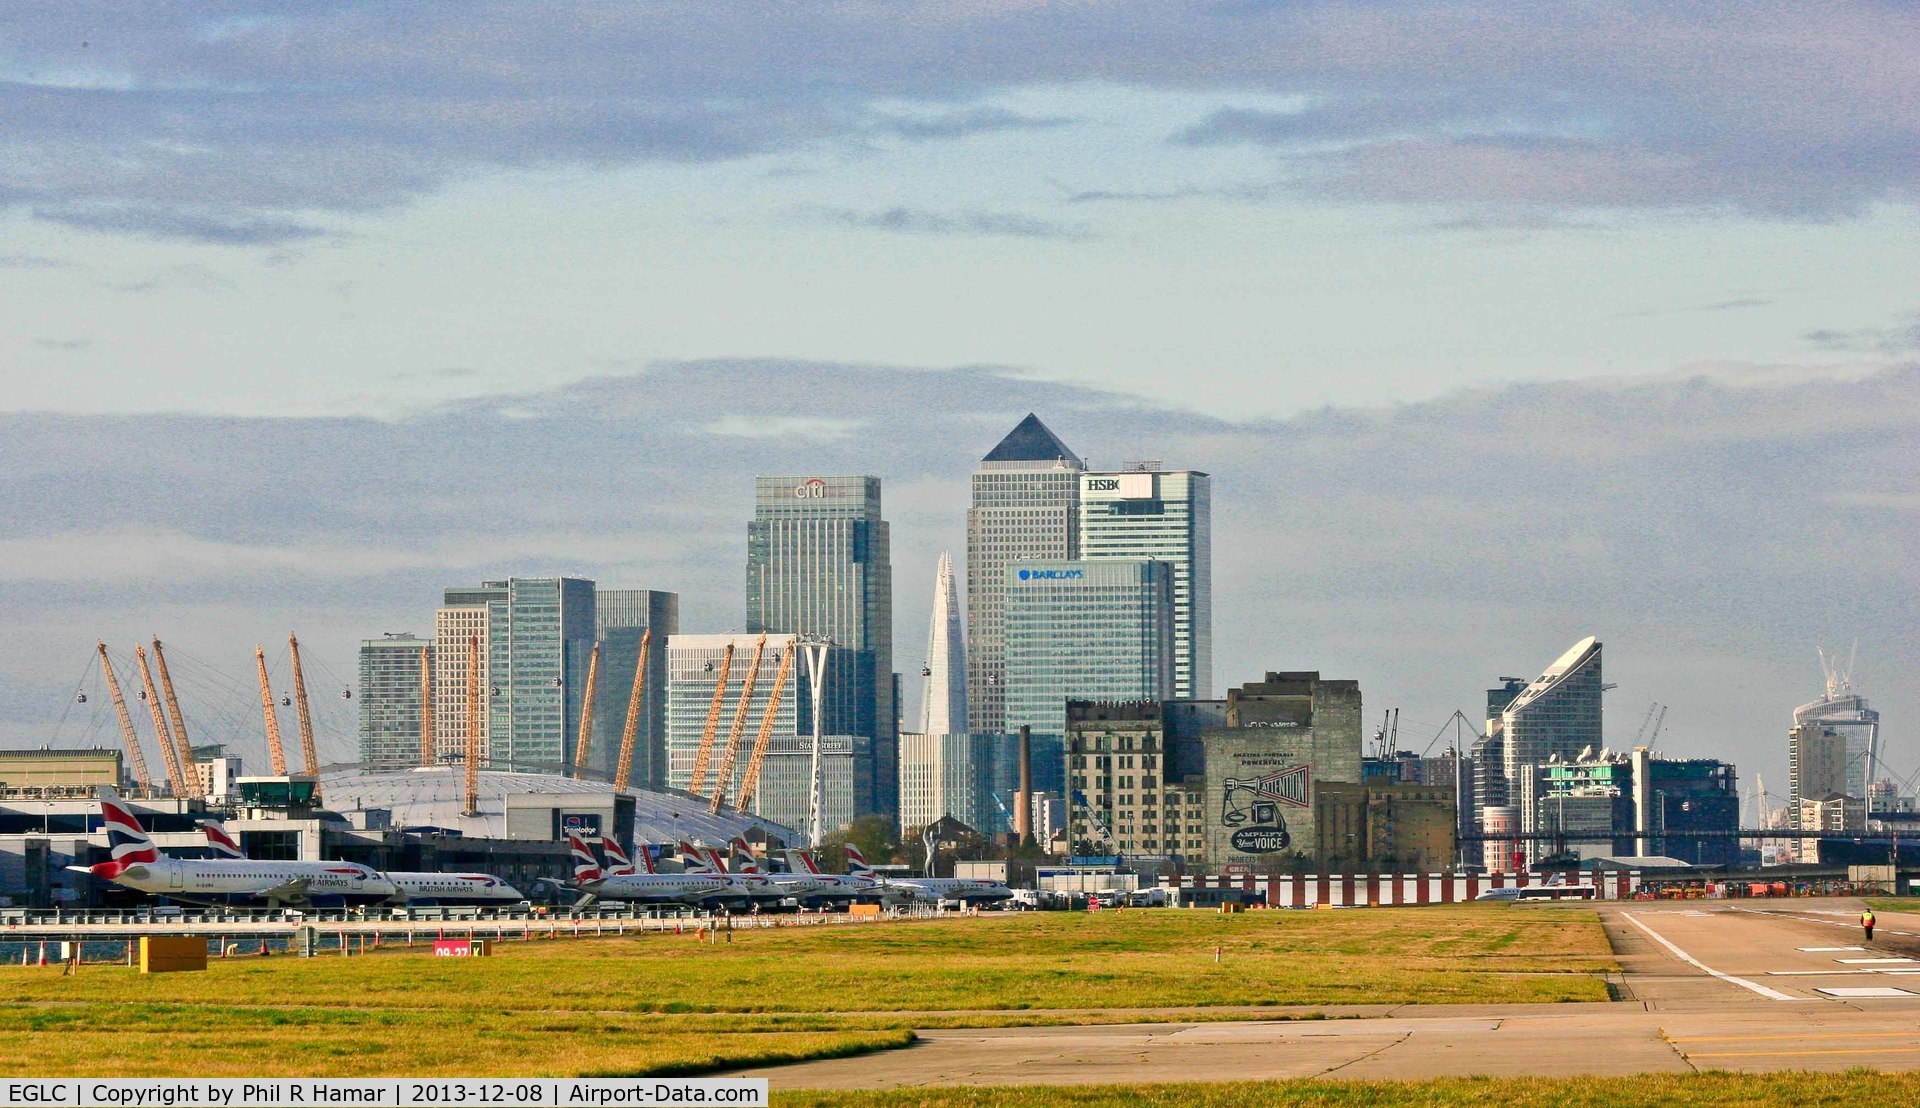 London City Airport, London, England United Kingdom (EGLC) - It's after noon on Sunday 8/12/2013 & LCY is opening up.